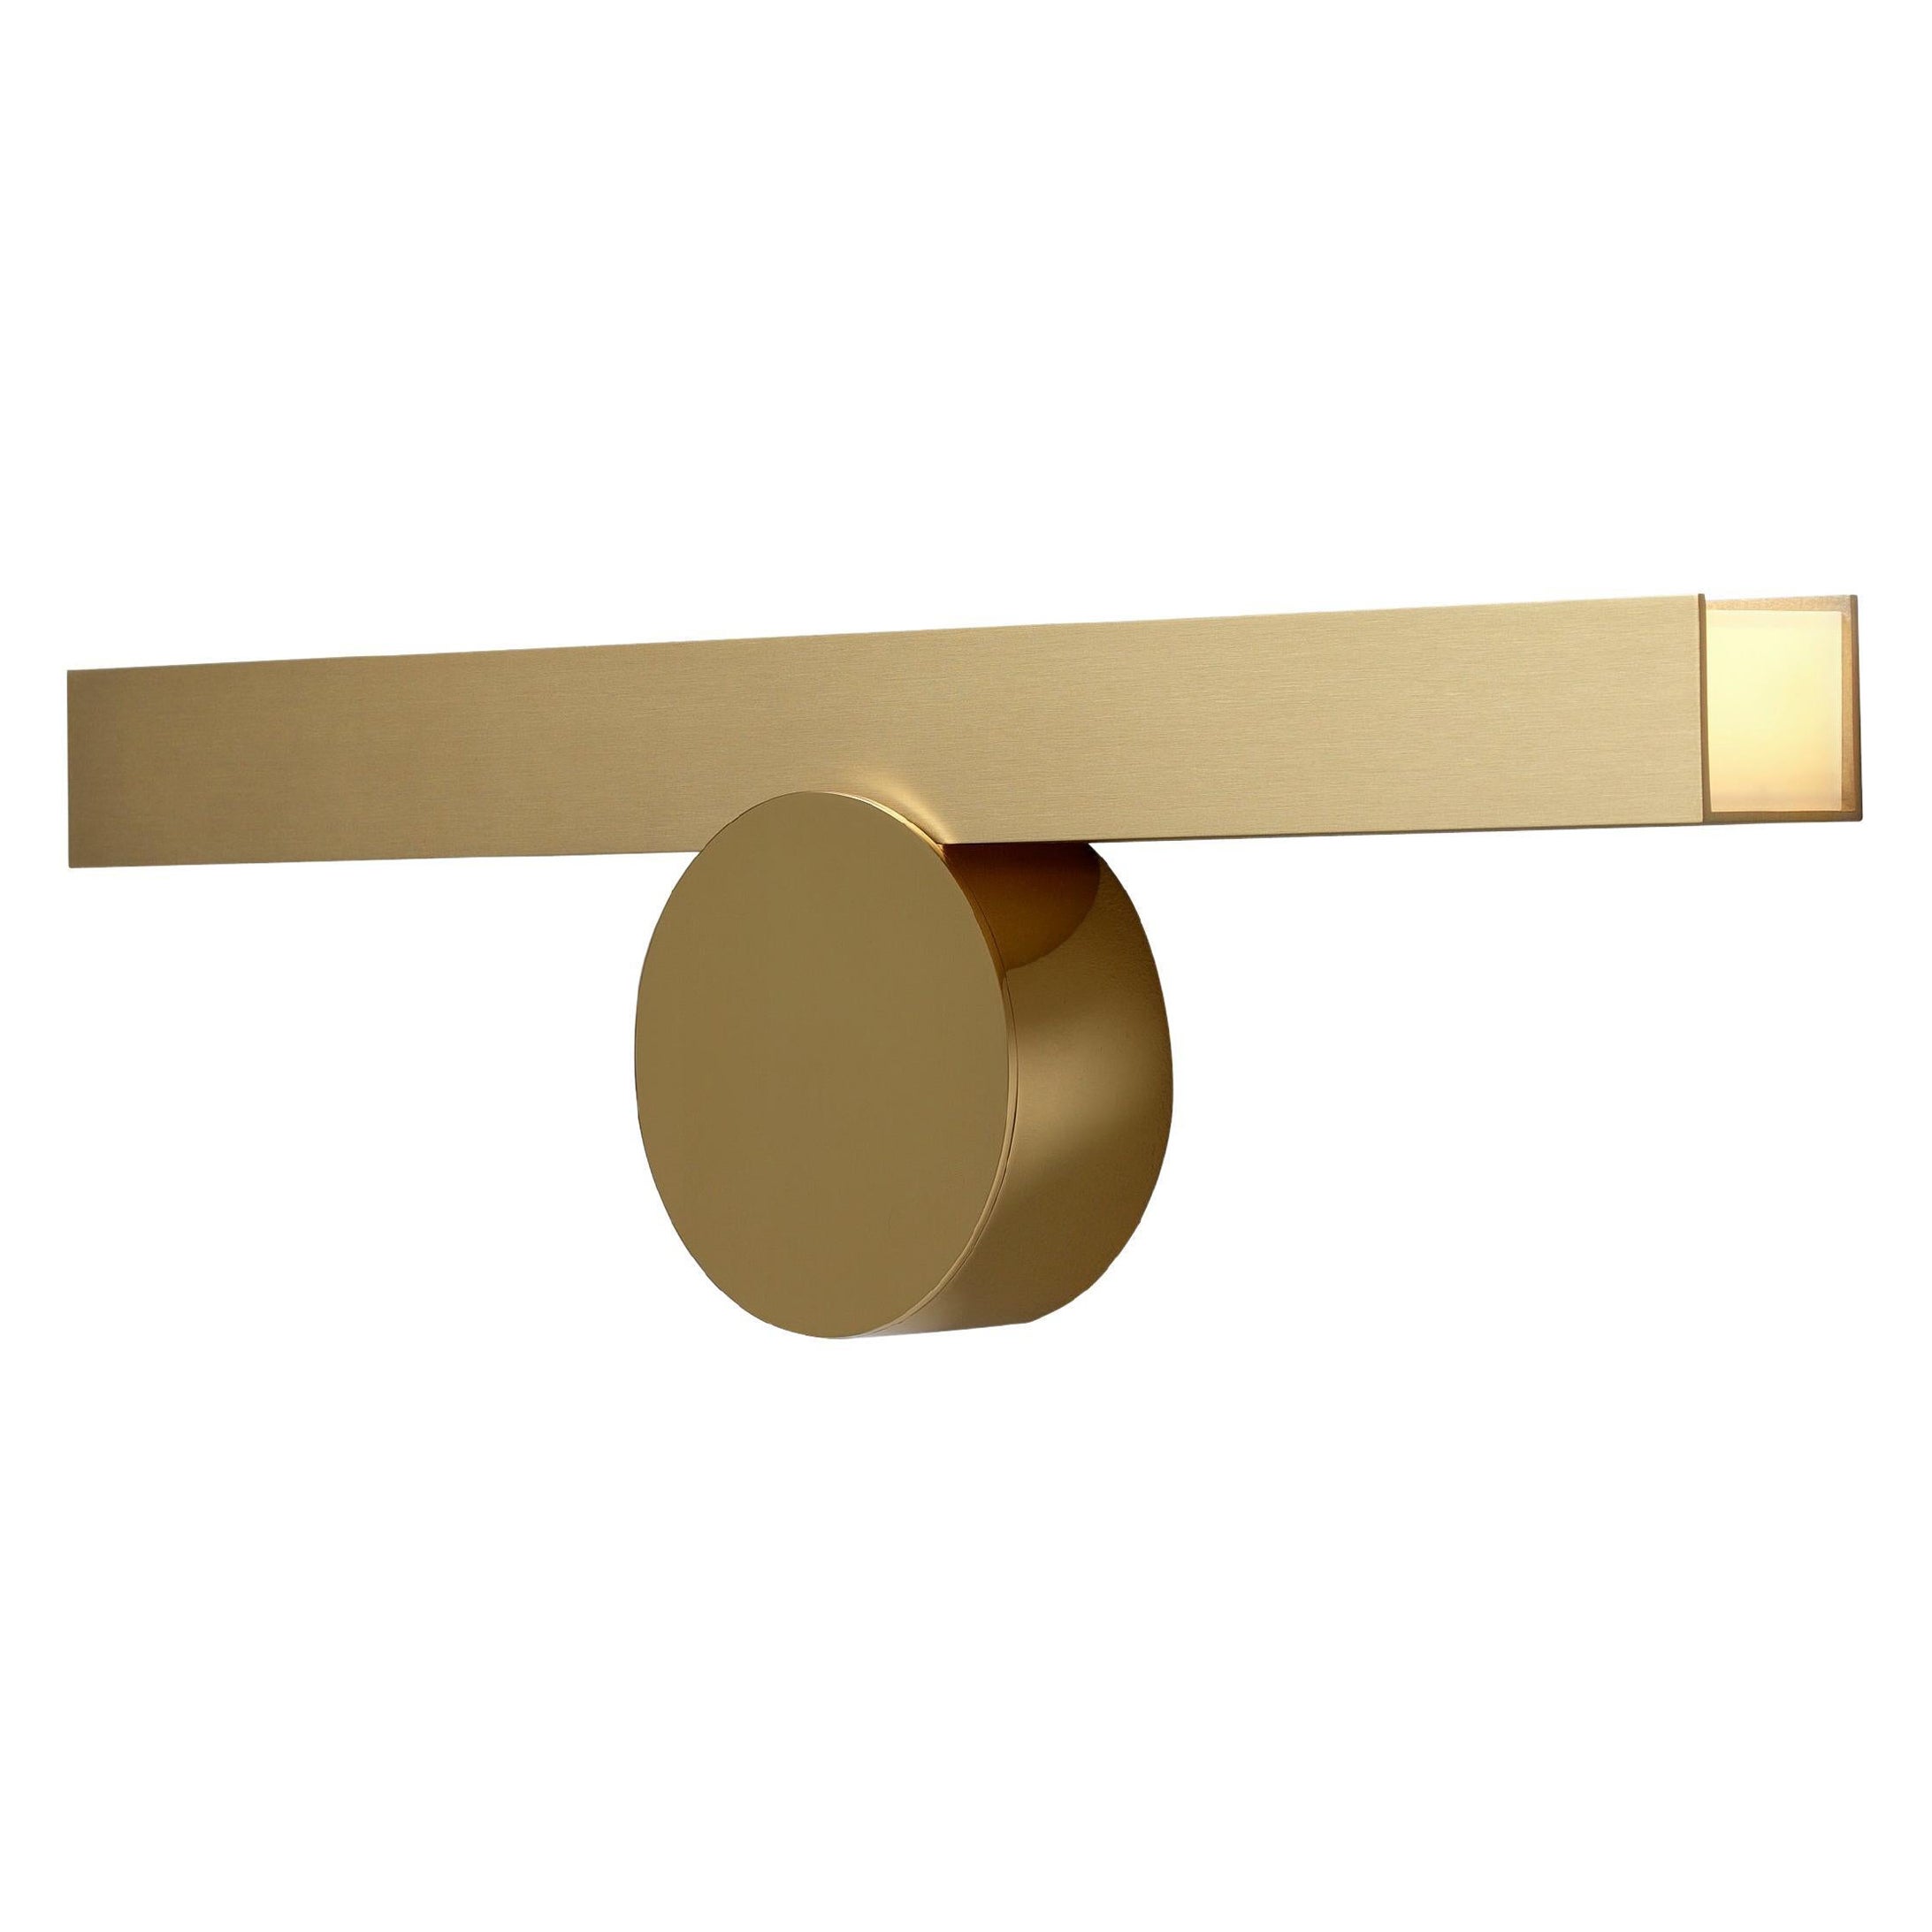 Ip Calee V1 Satin Polished Brass Wall Light by POOL For Sale